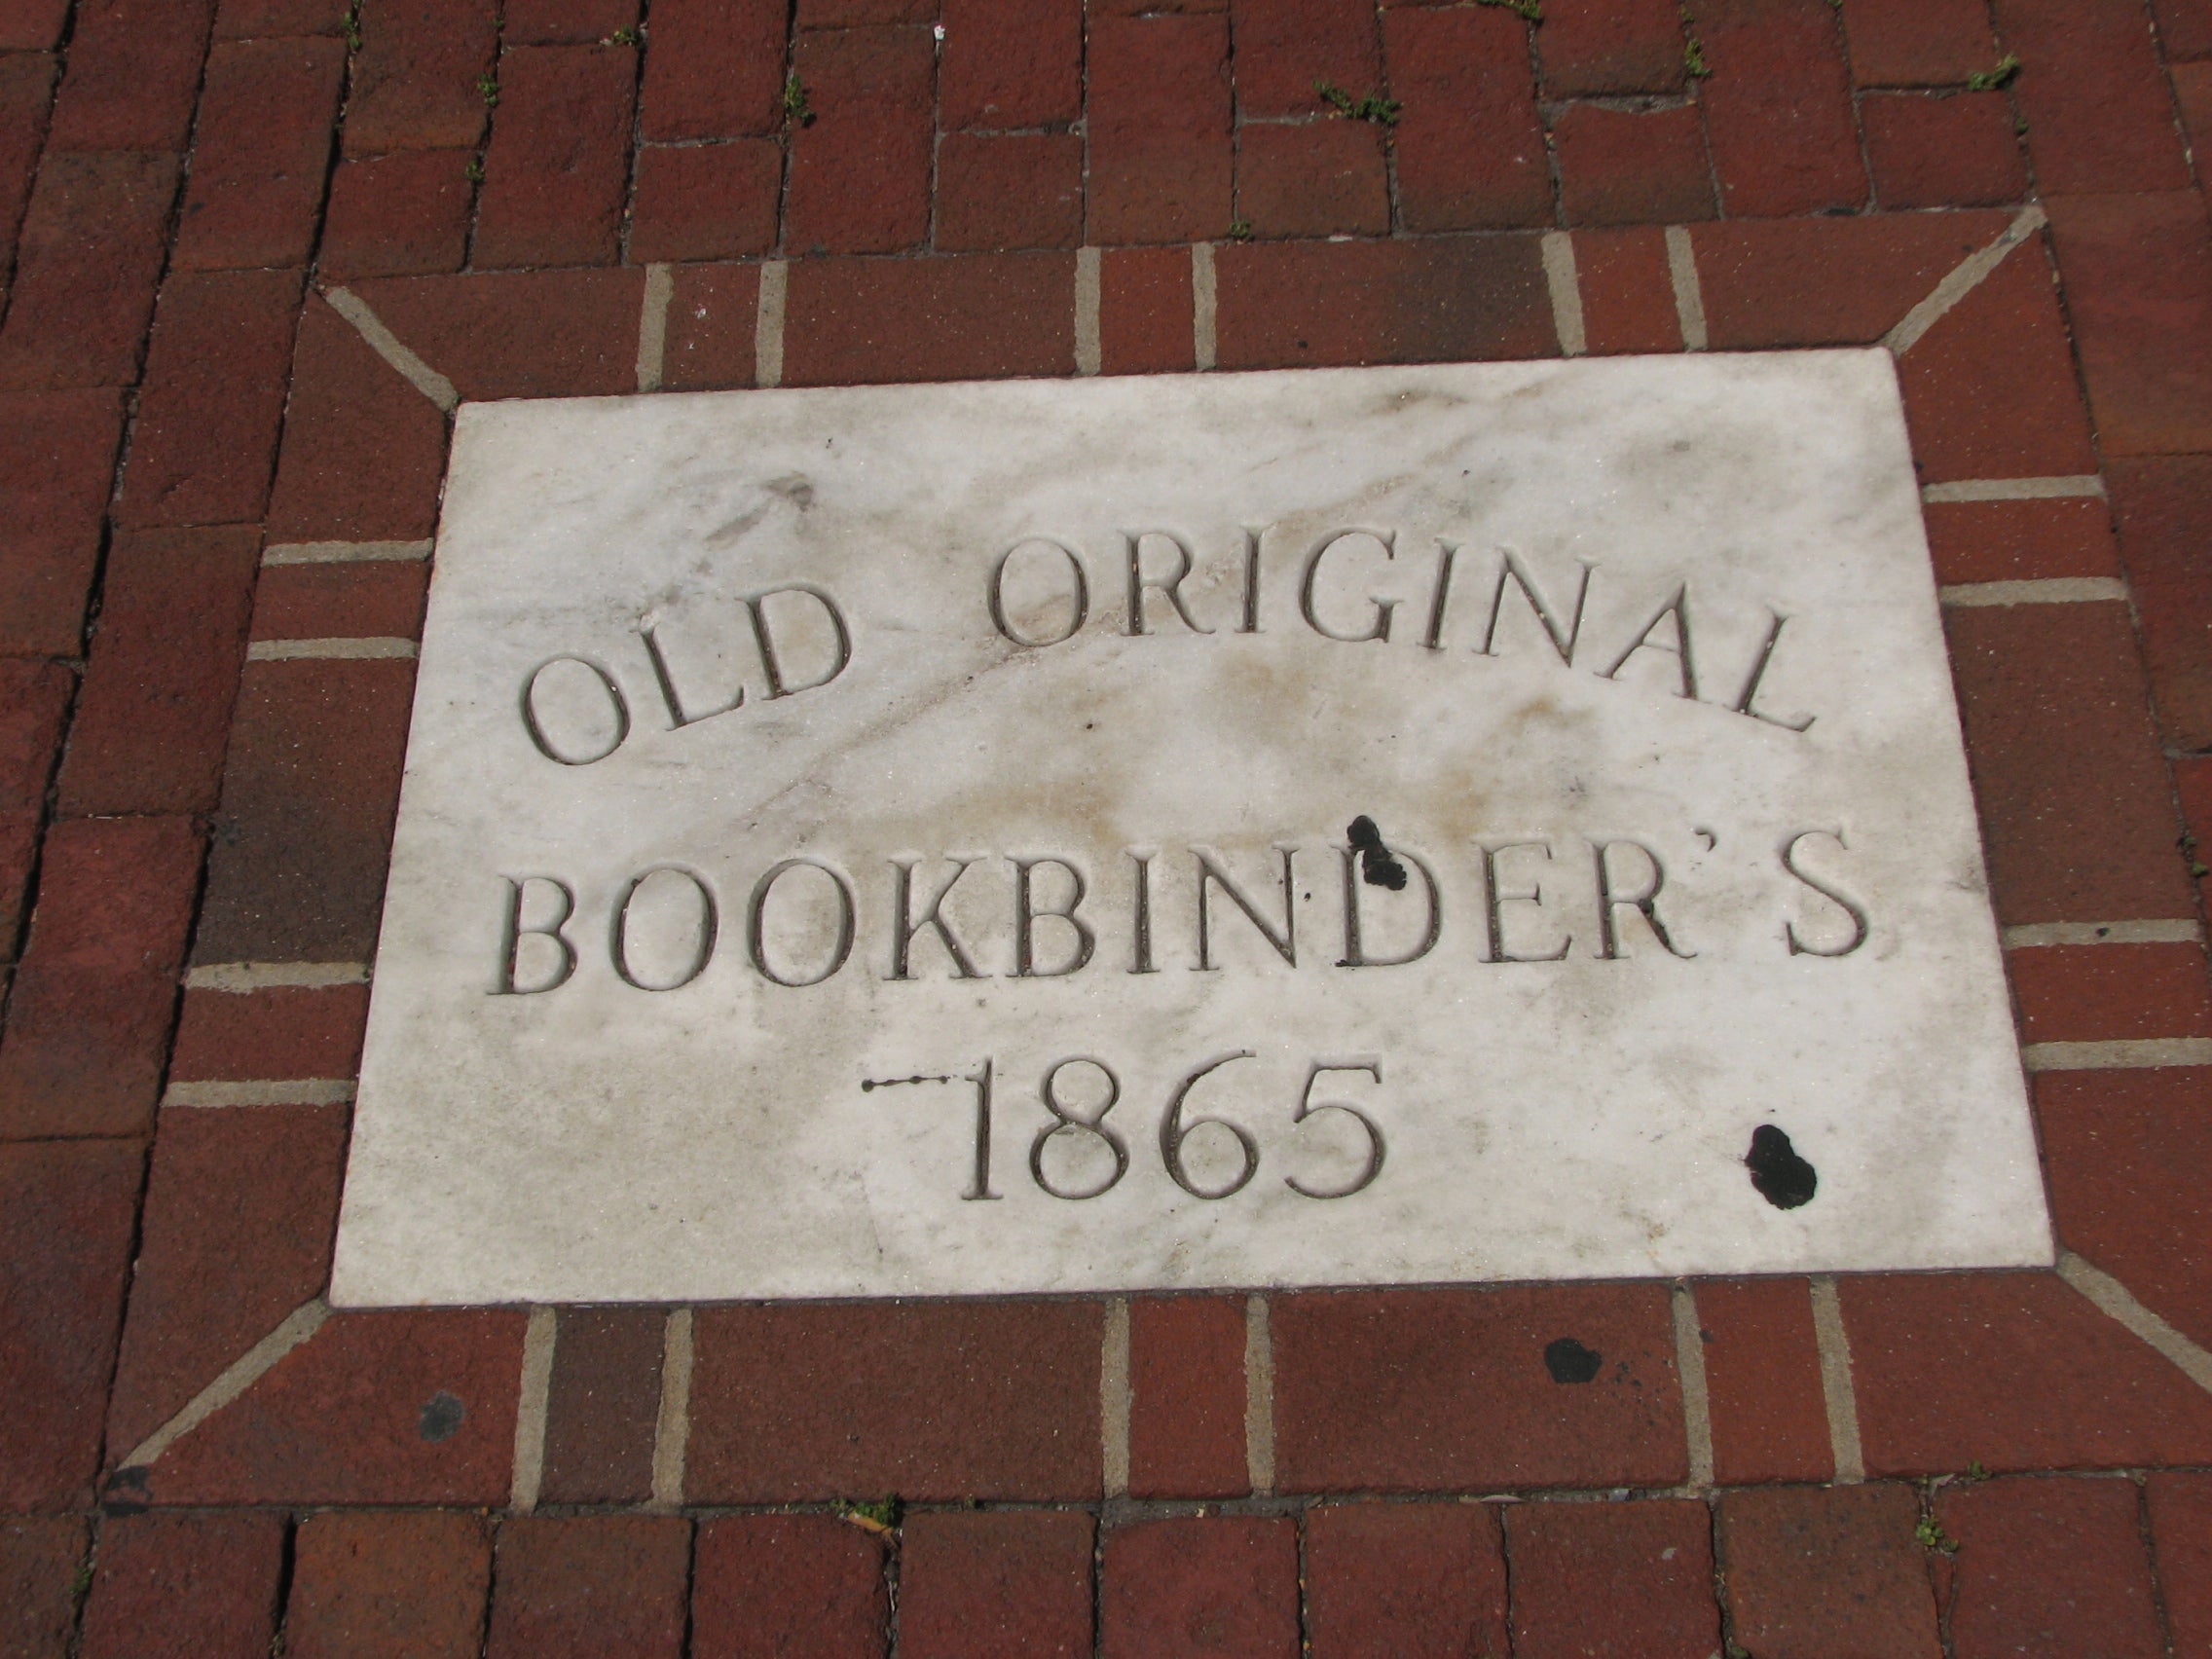 A plaque on the sidewalk in front of the restaurant claims origins that date to 1865.